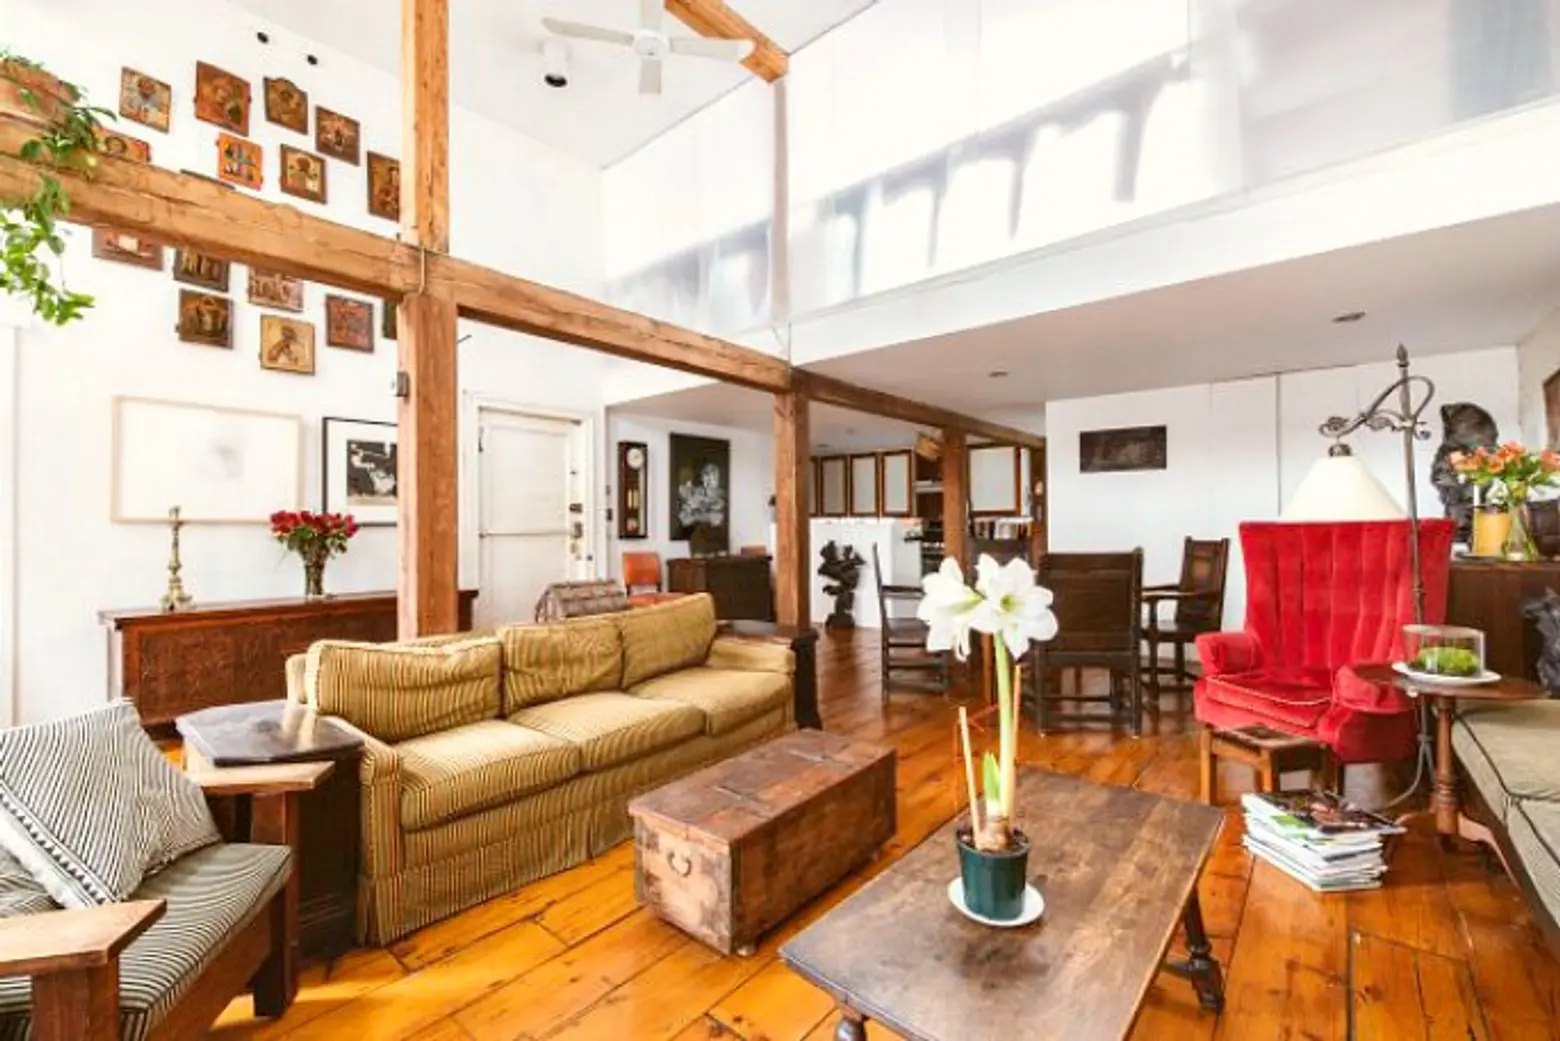 Spend the Summer in a Furnished Bohemian Loft in the West Village for $7K/Month